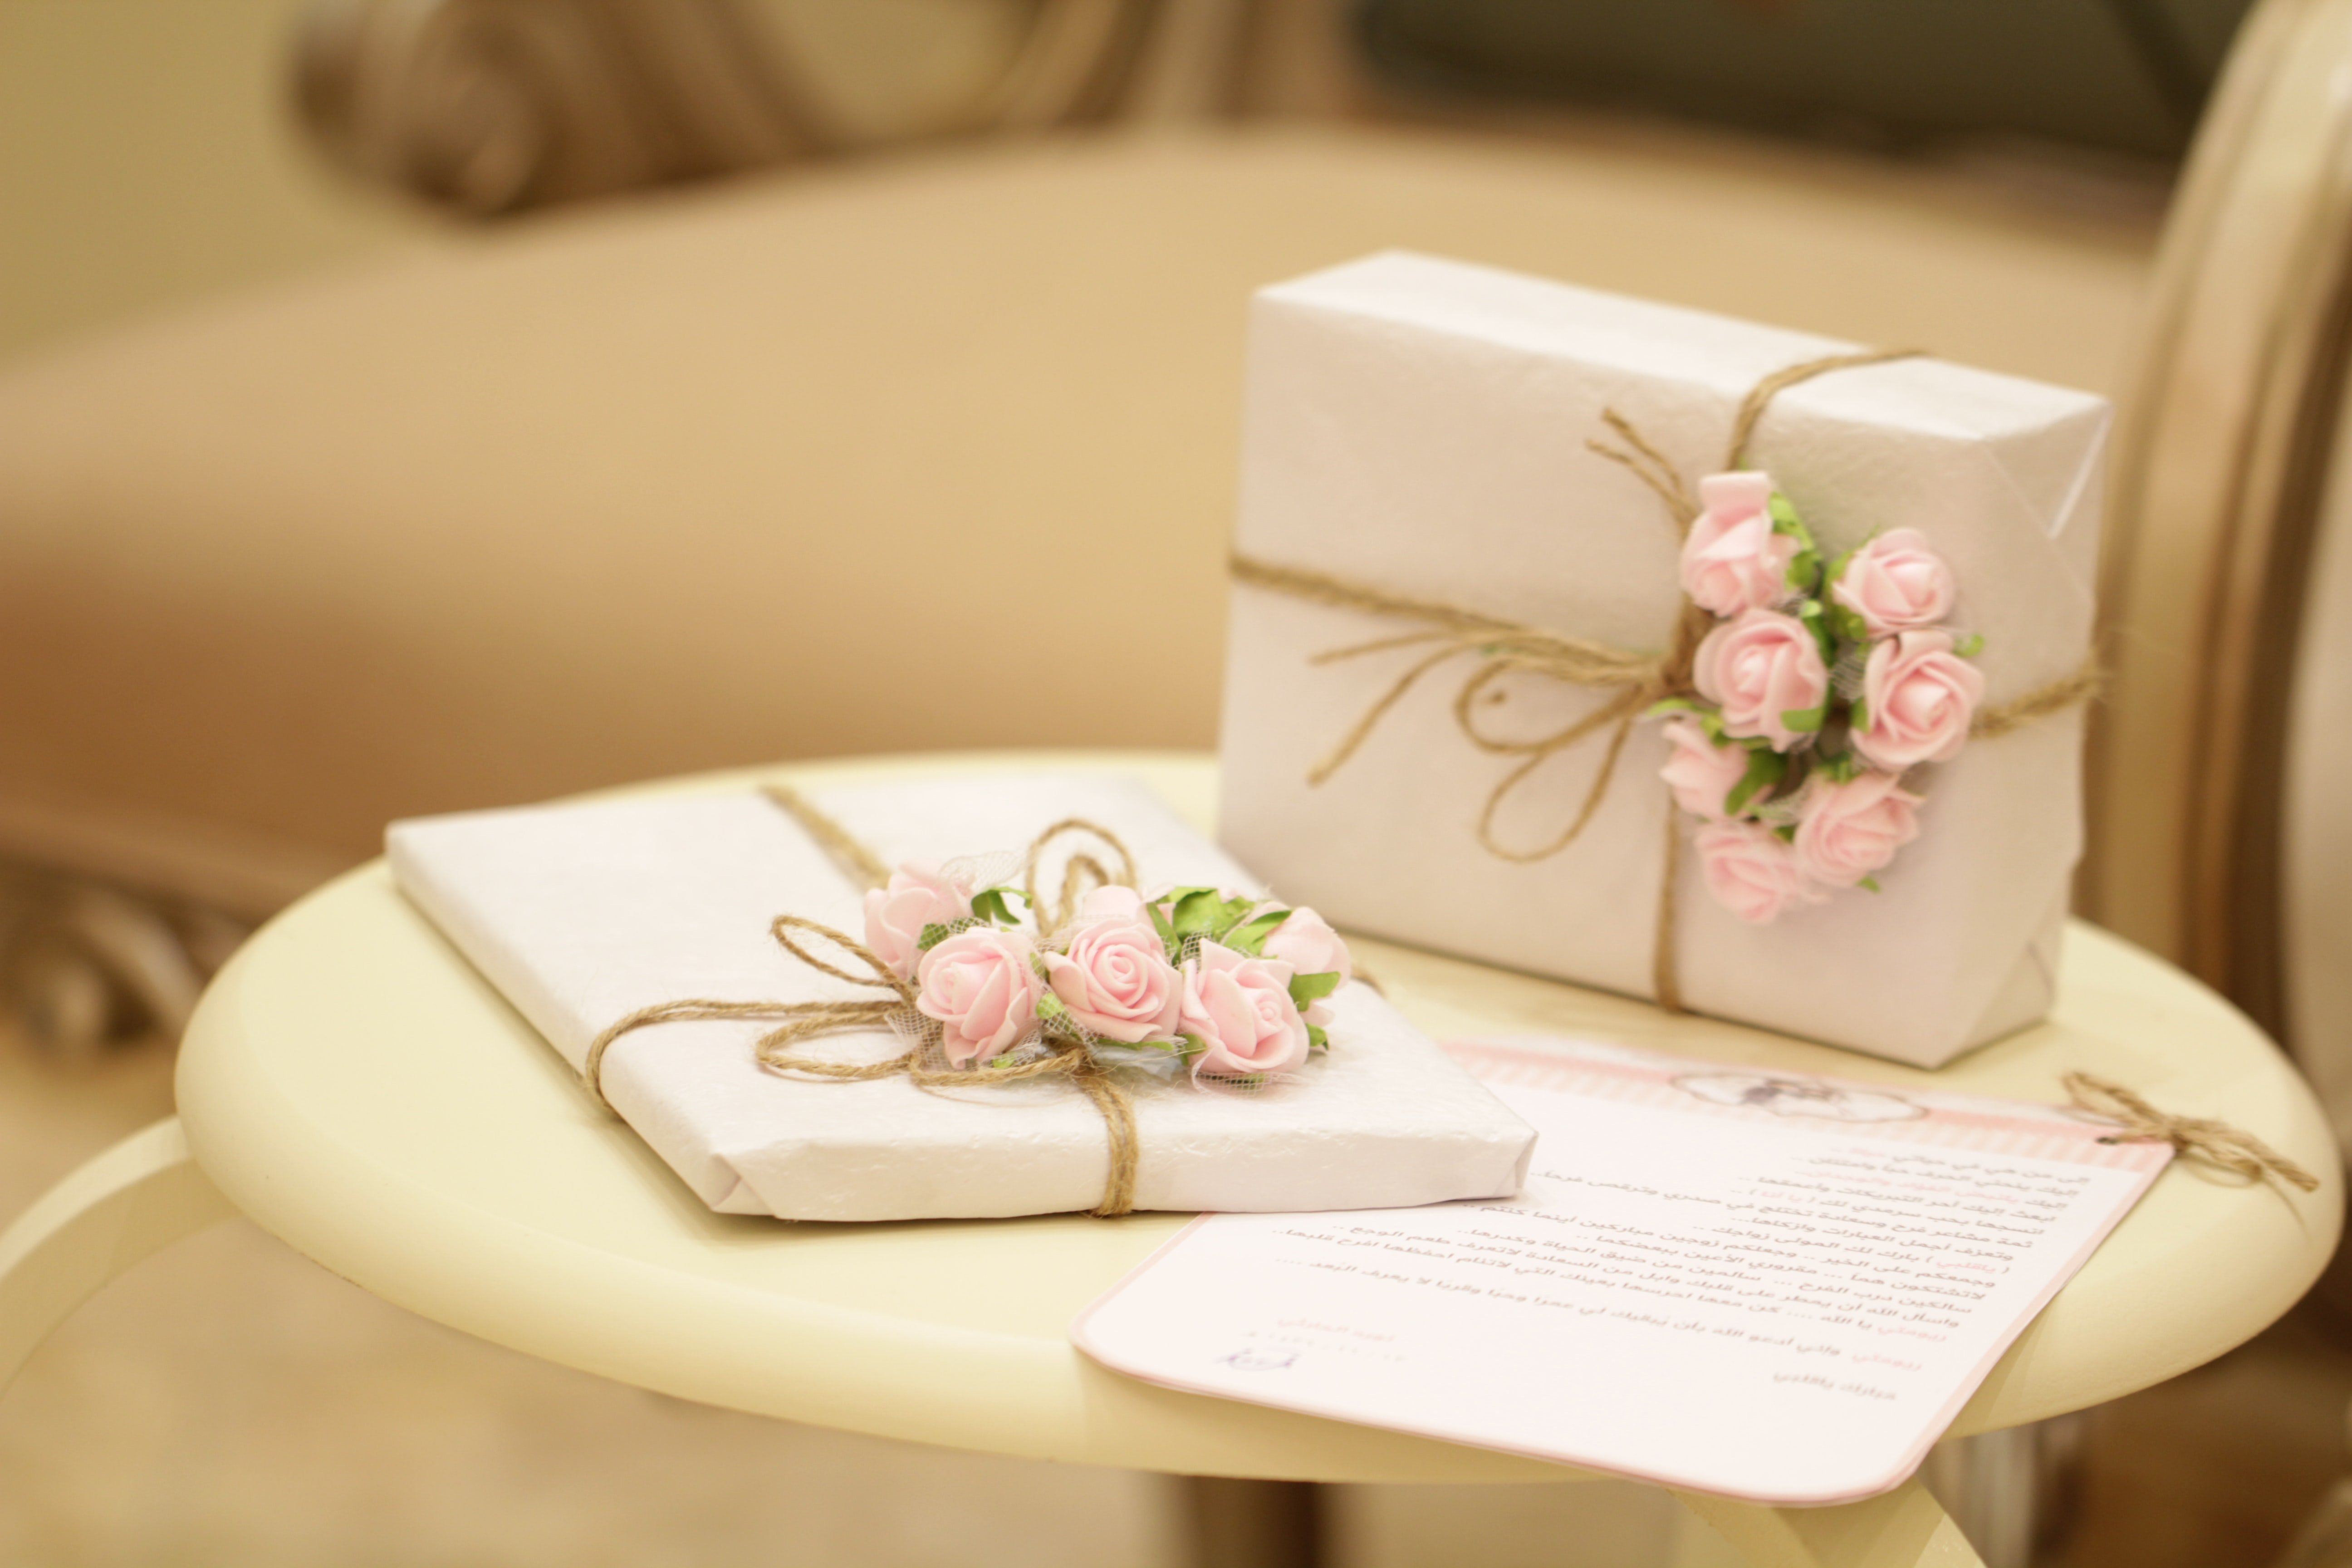 Wedding presents are wrapped in white paper and placed on the gift table for the bride and groom | Photo: Unsplash/Wijdan Mq